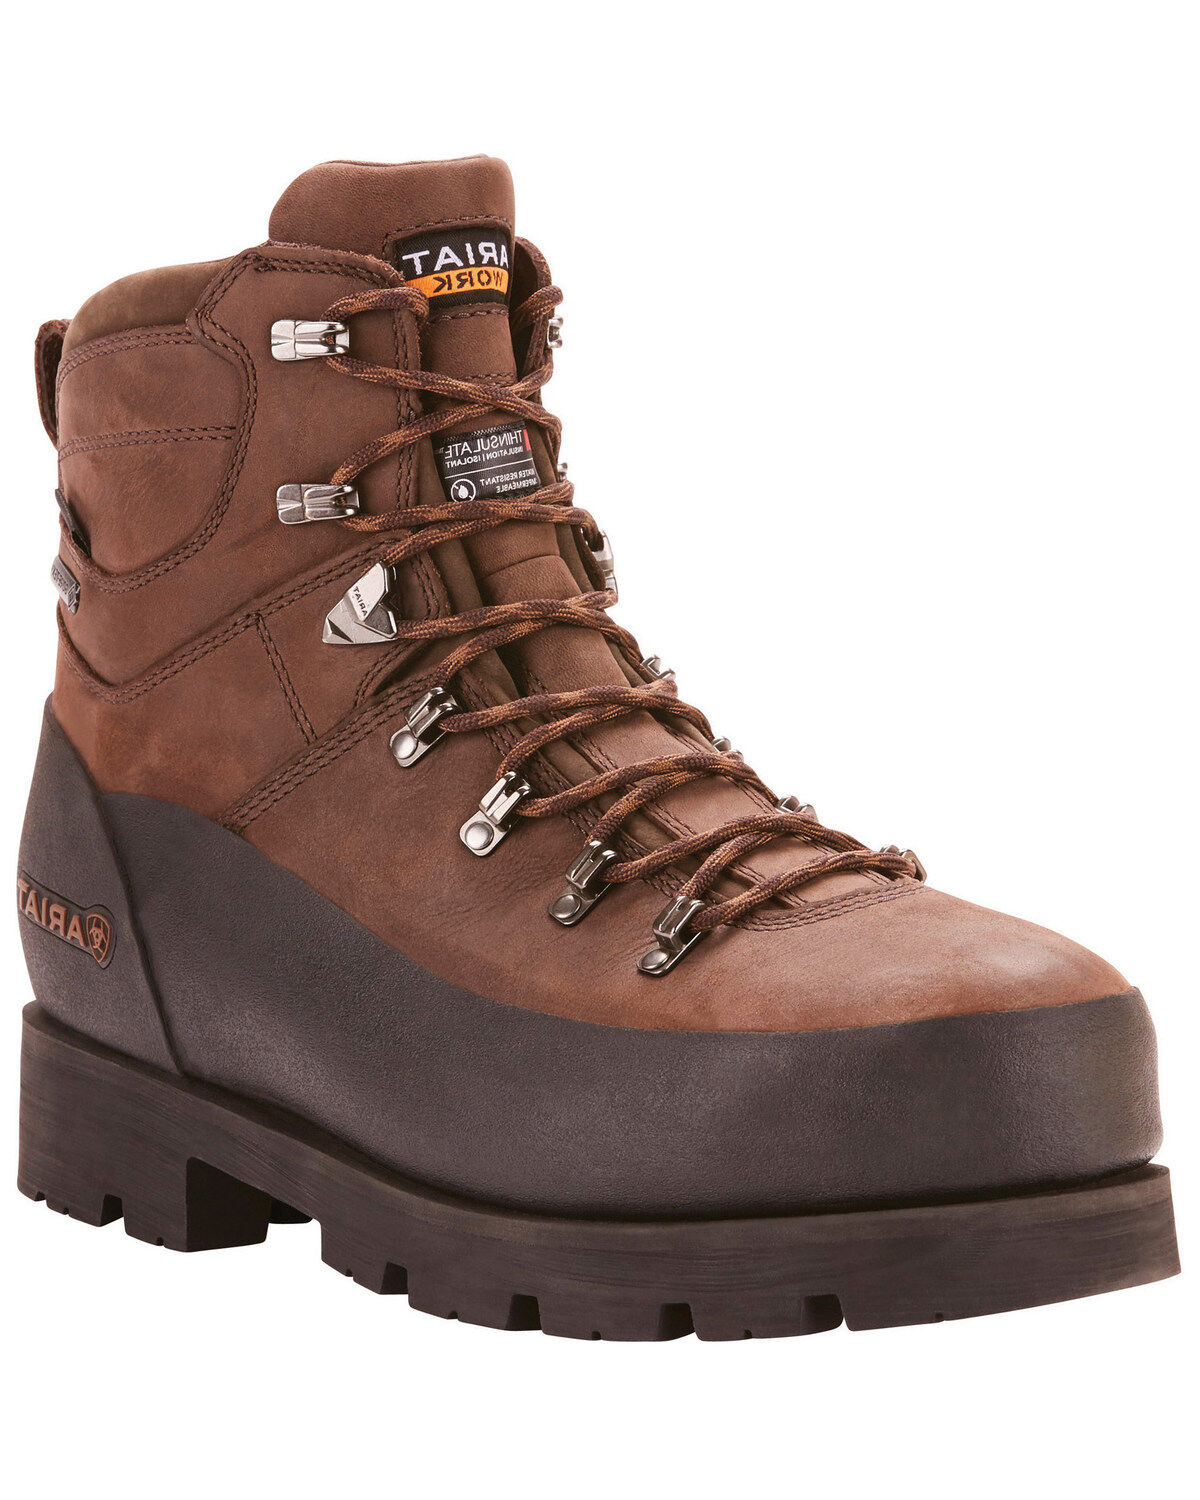 ariat insulated work boots